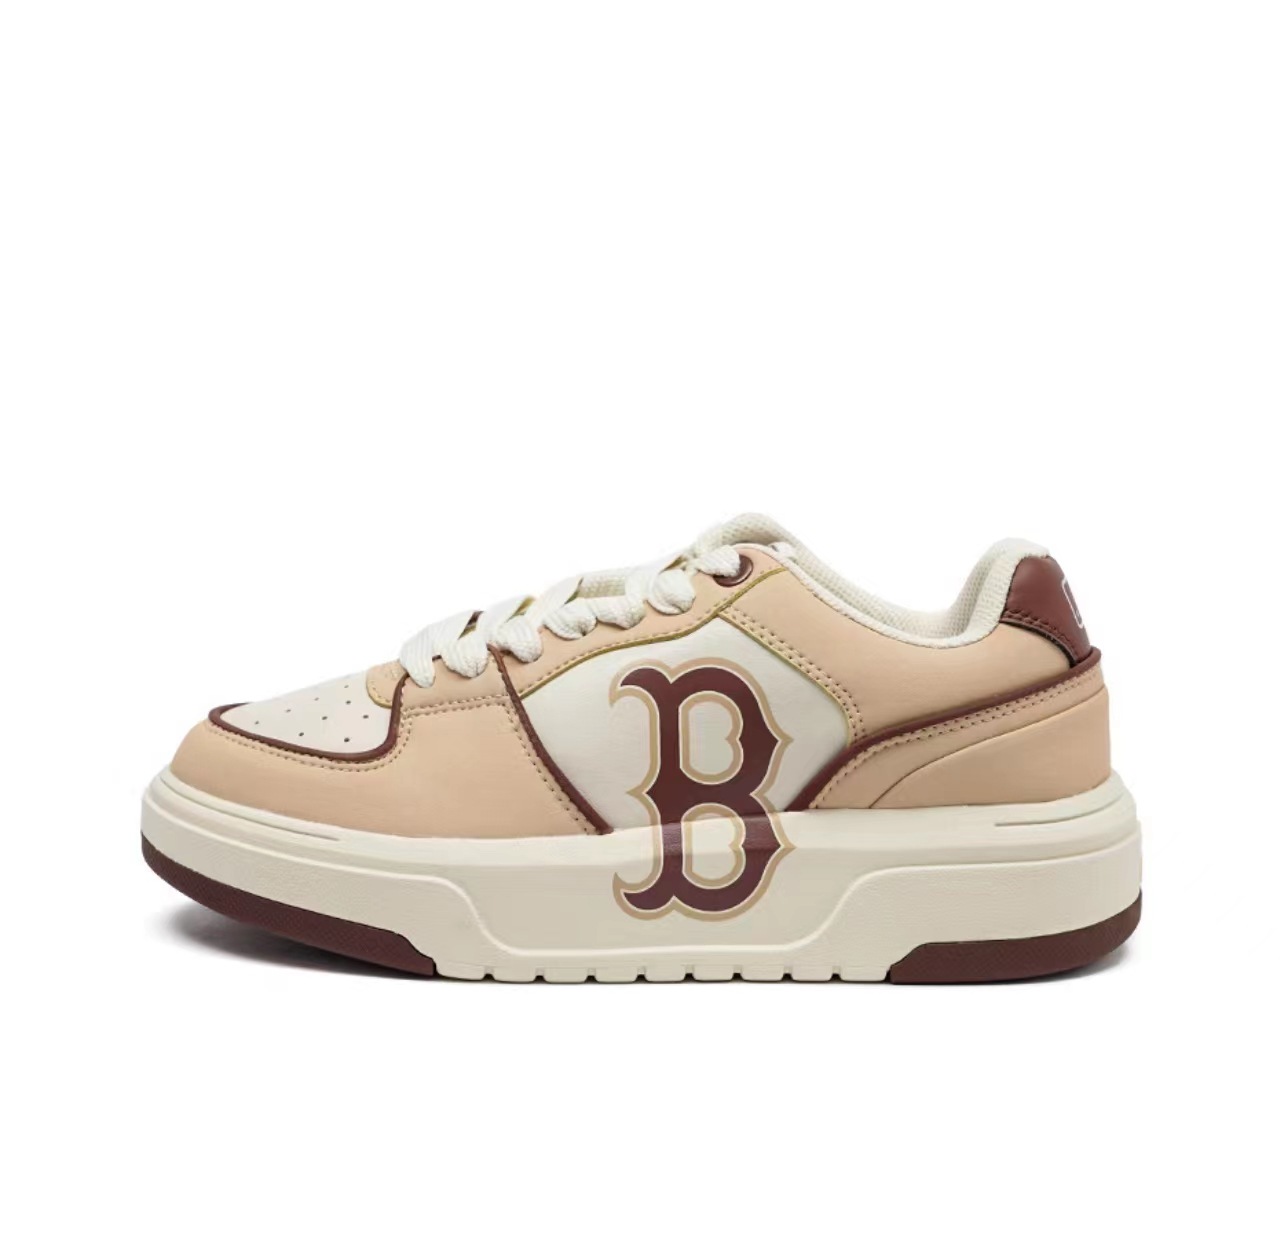 Men's MLB NY boston red sox LACE-UP LEATHER SNEAKERS shoes ユニ 